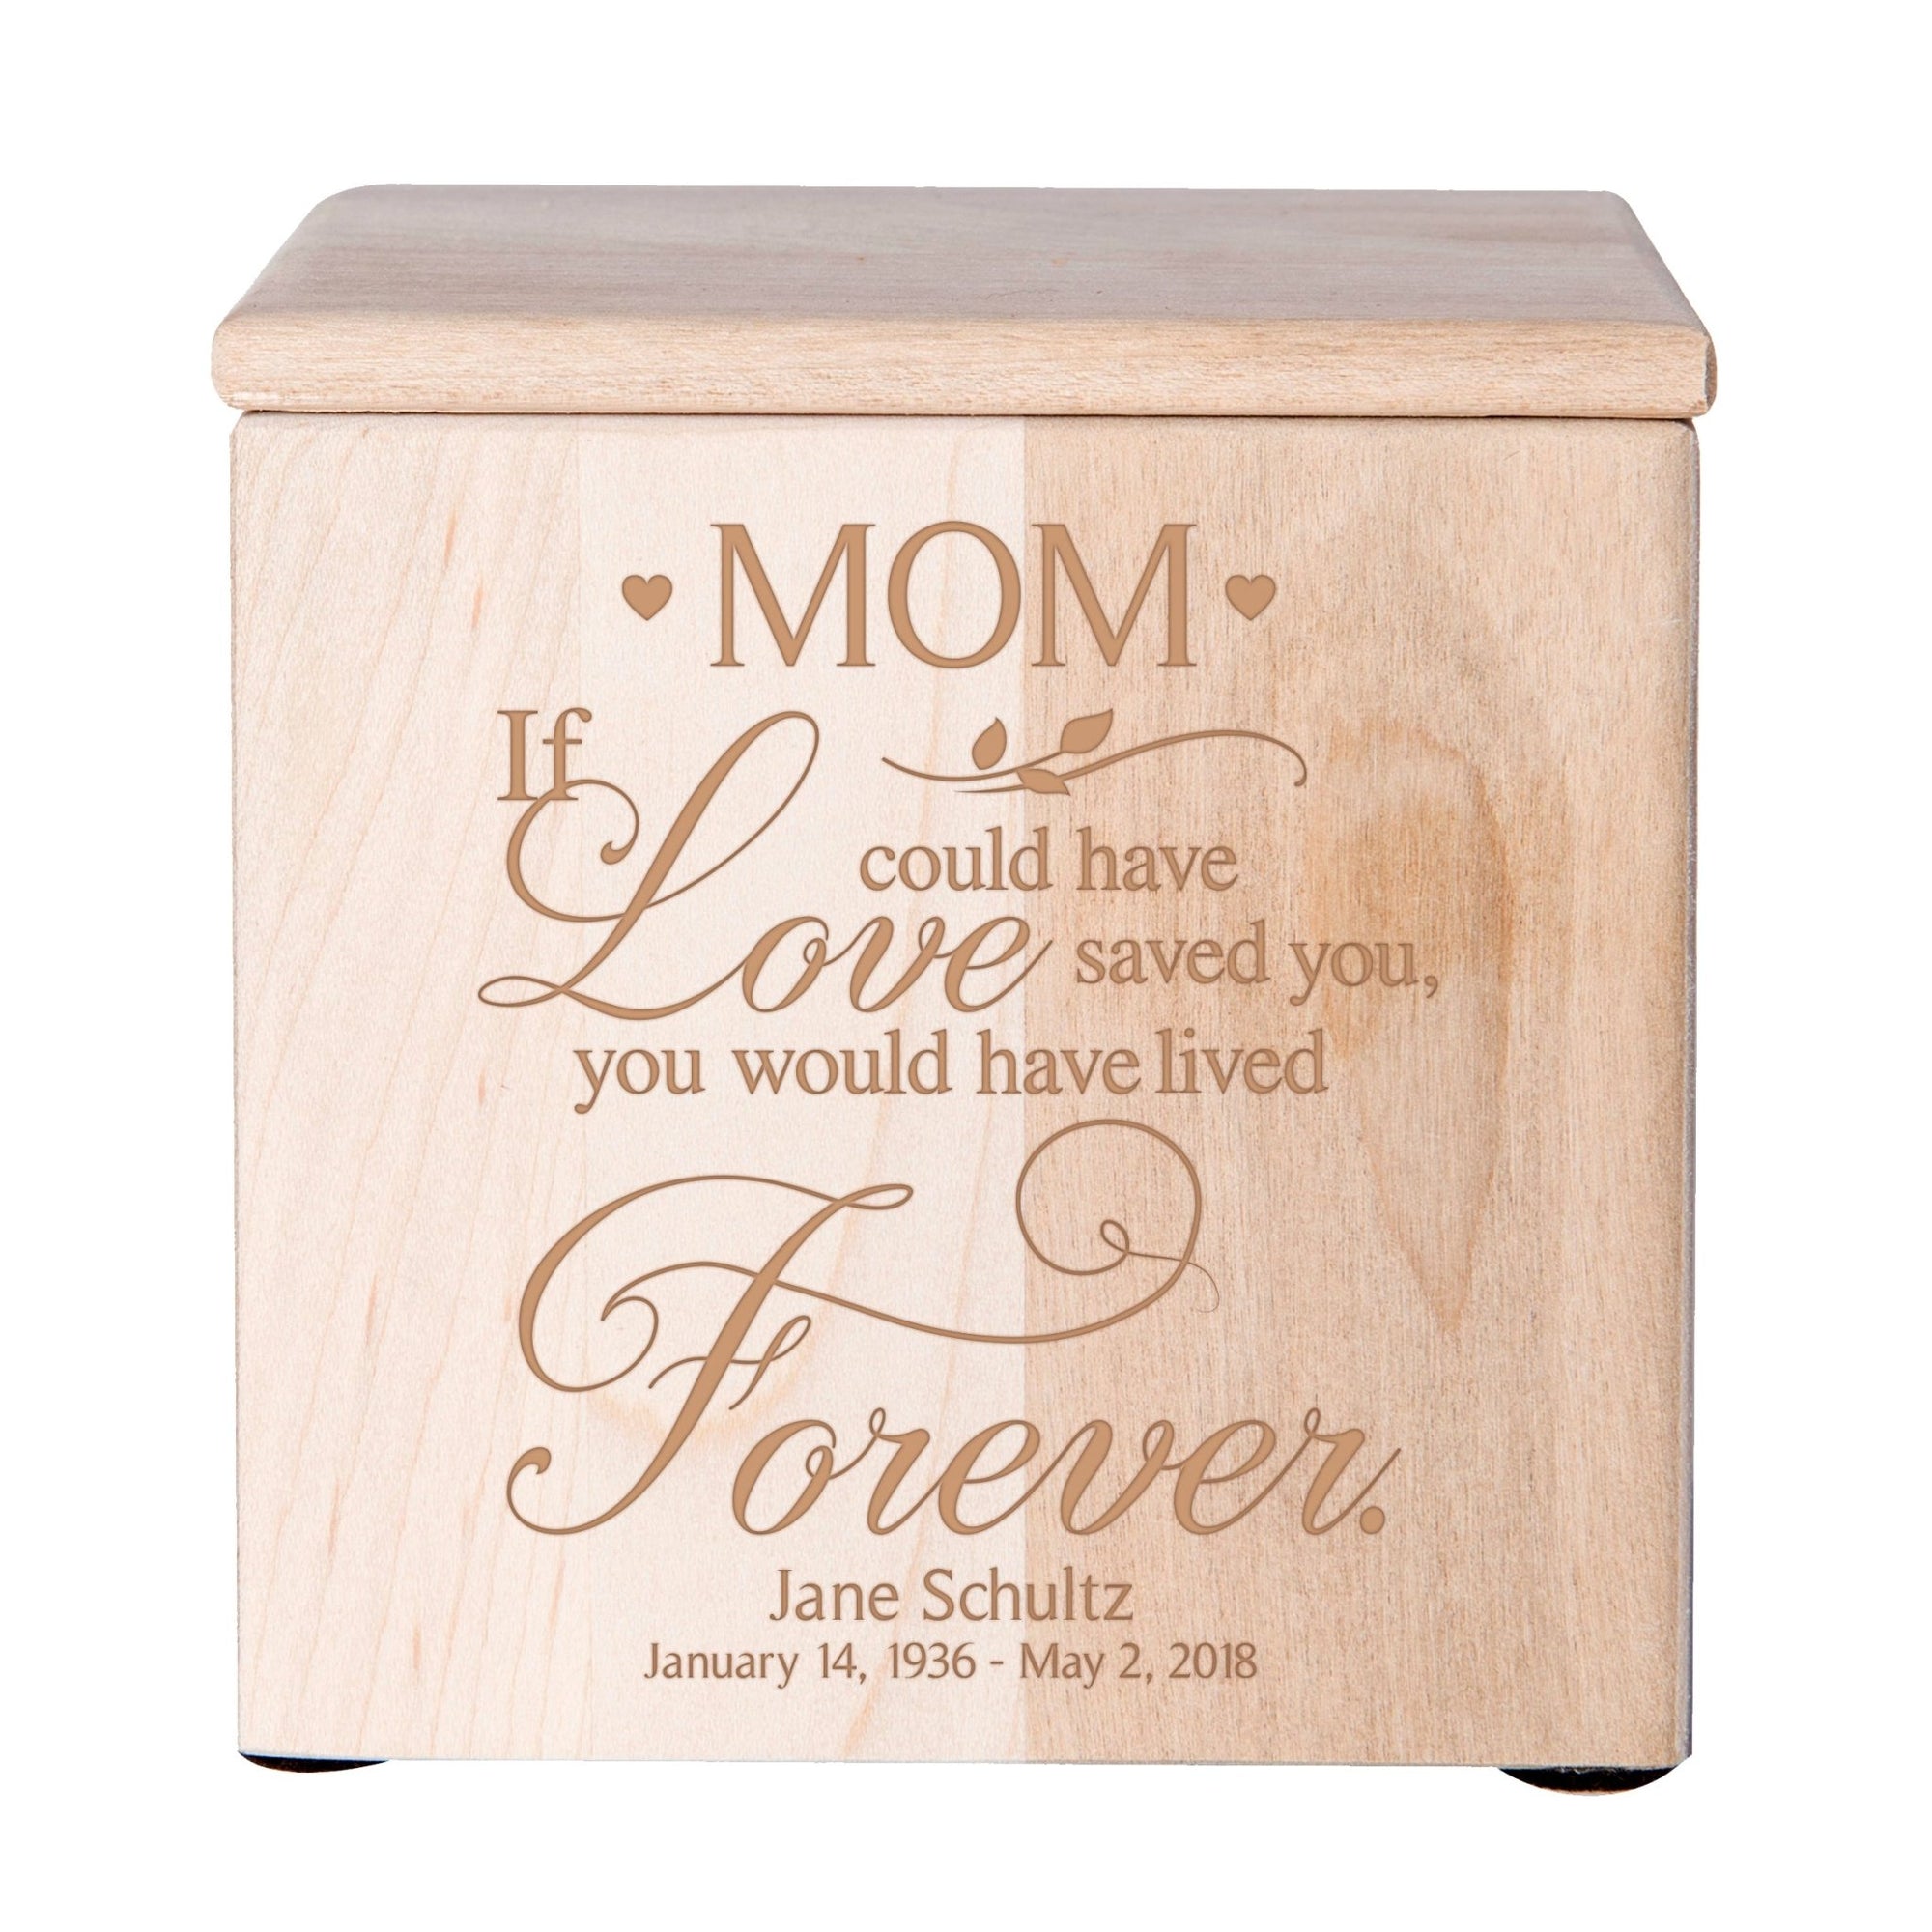 Personalized Memorial Cremation Urn Box for Human Ashes - Mom If love could have - LifeSong Milestones